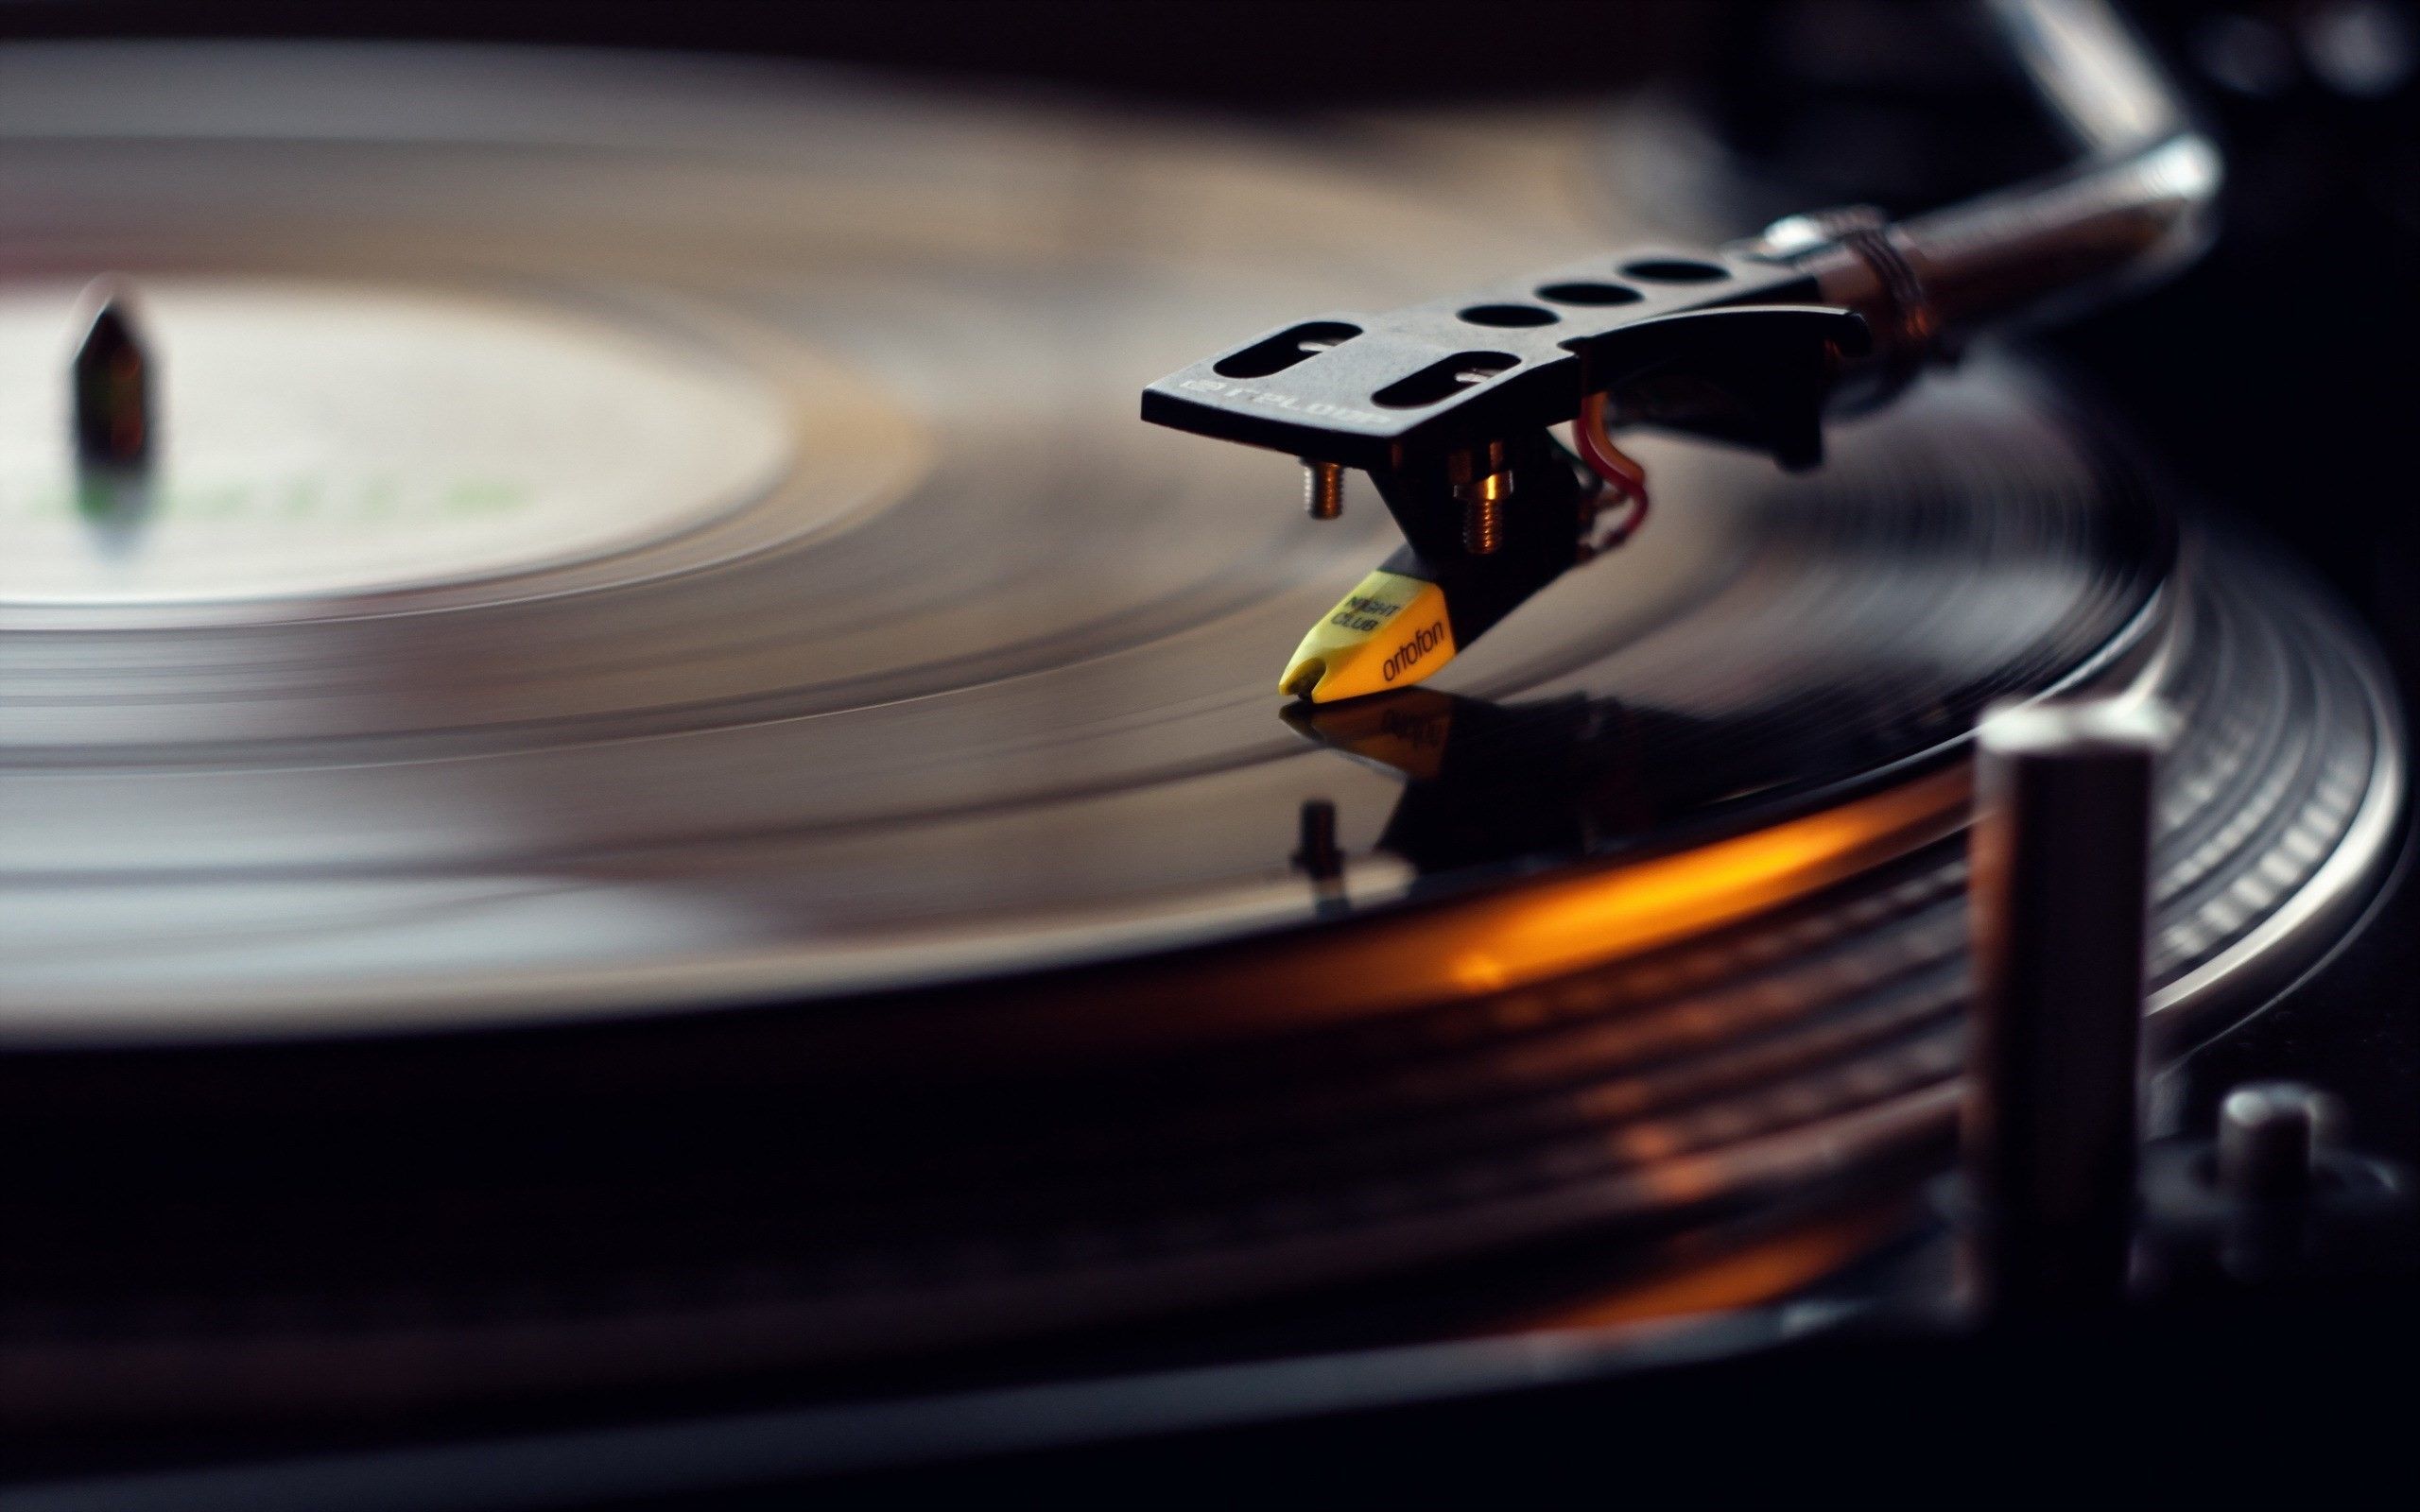 Vinyl Disk, HD Music, 4k Wallpaper, Image, Background, Photo and Picture